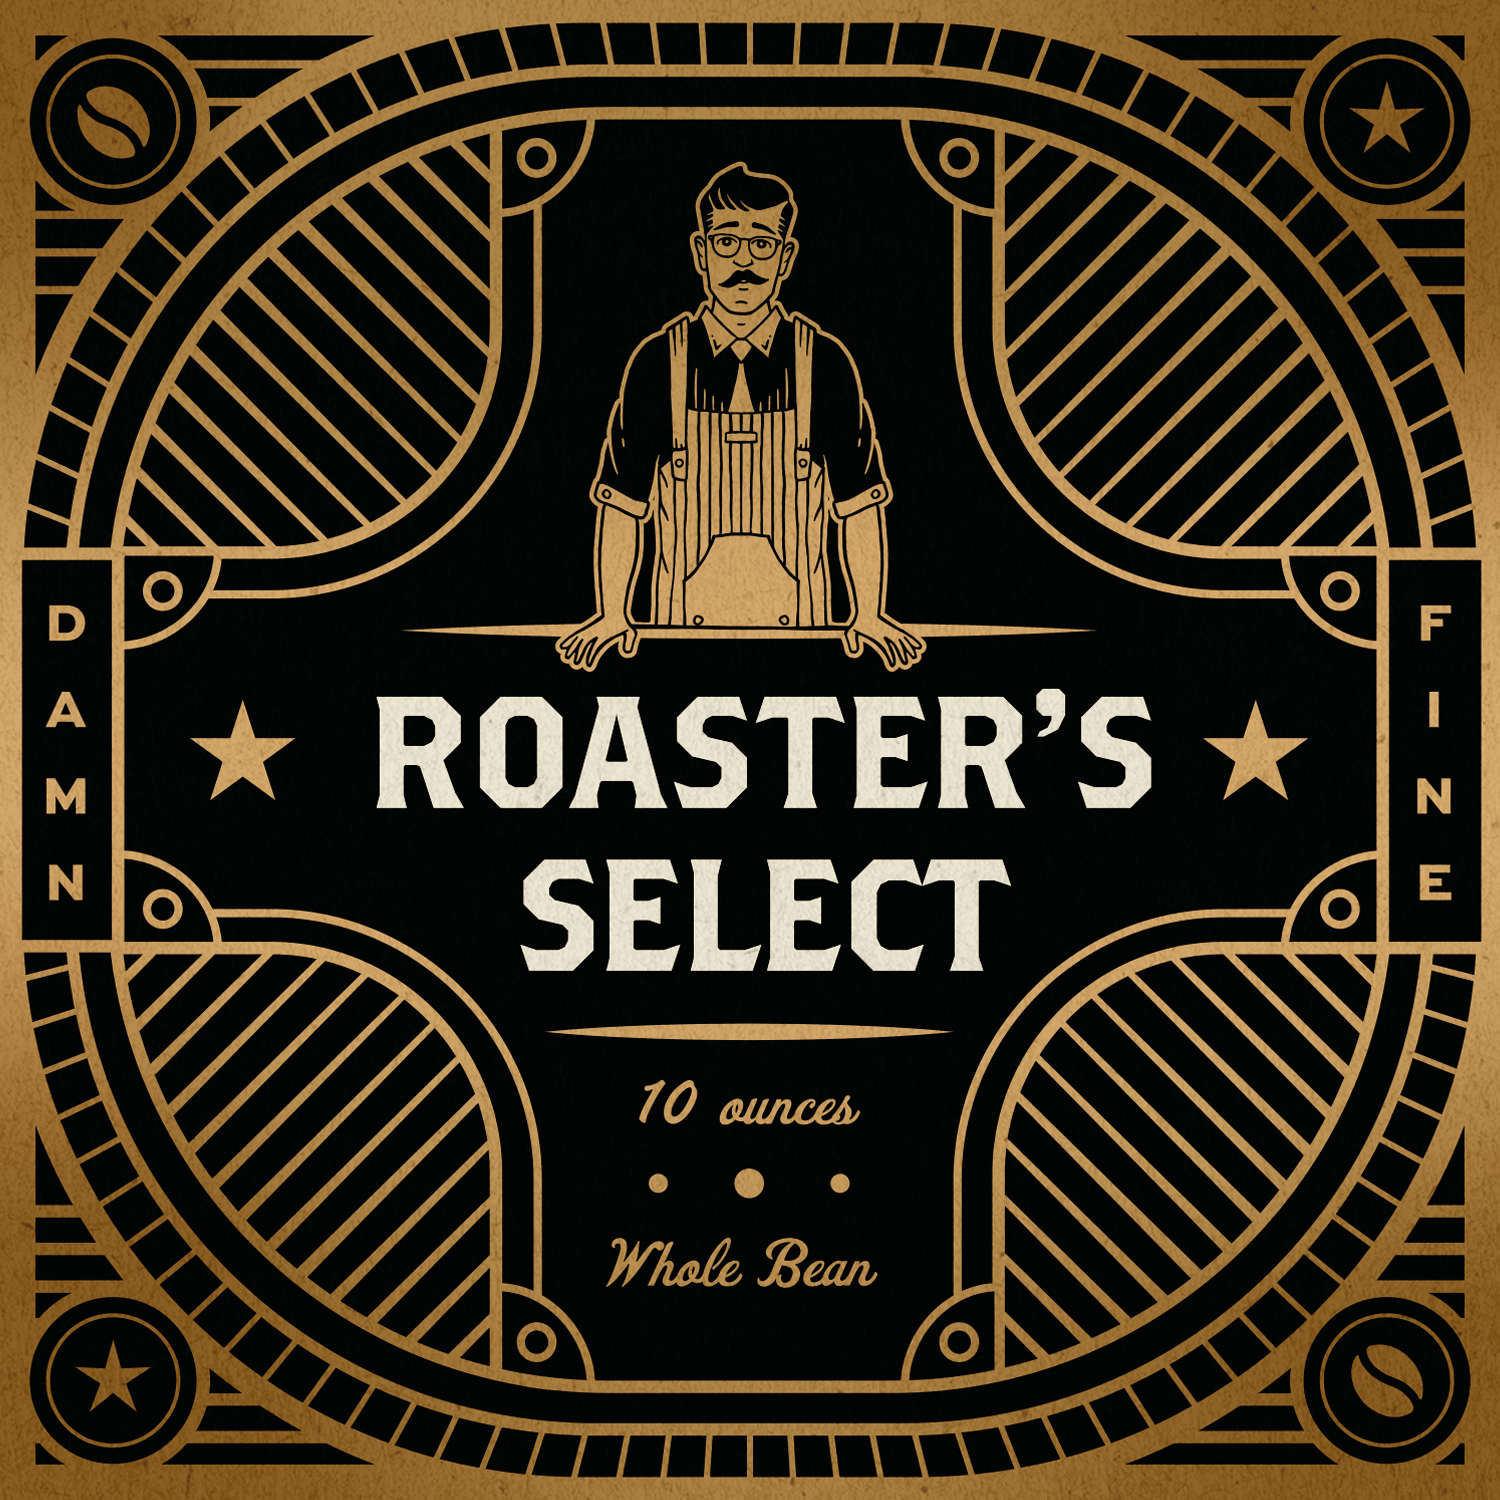 Roaster's Select - Two Bags